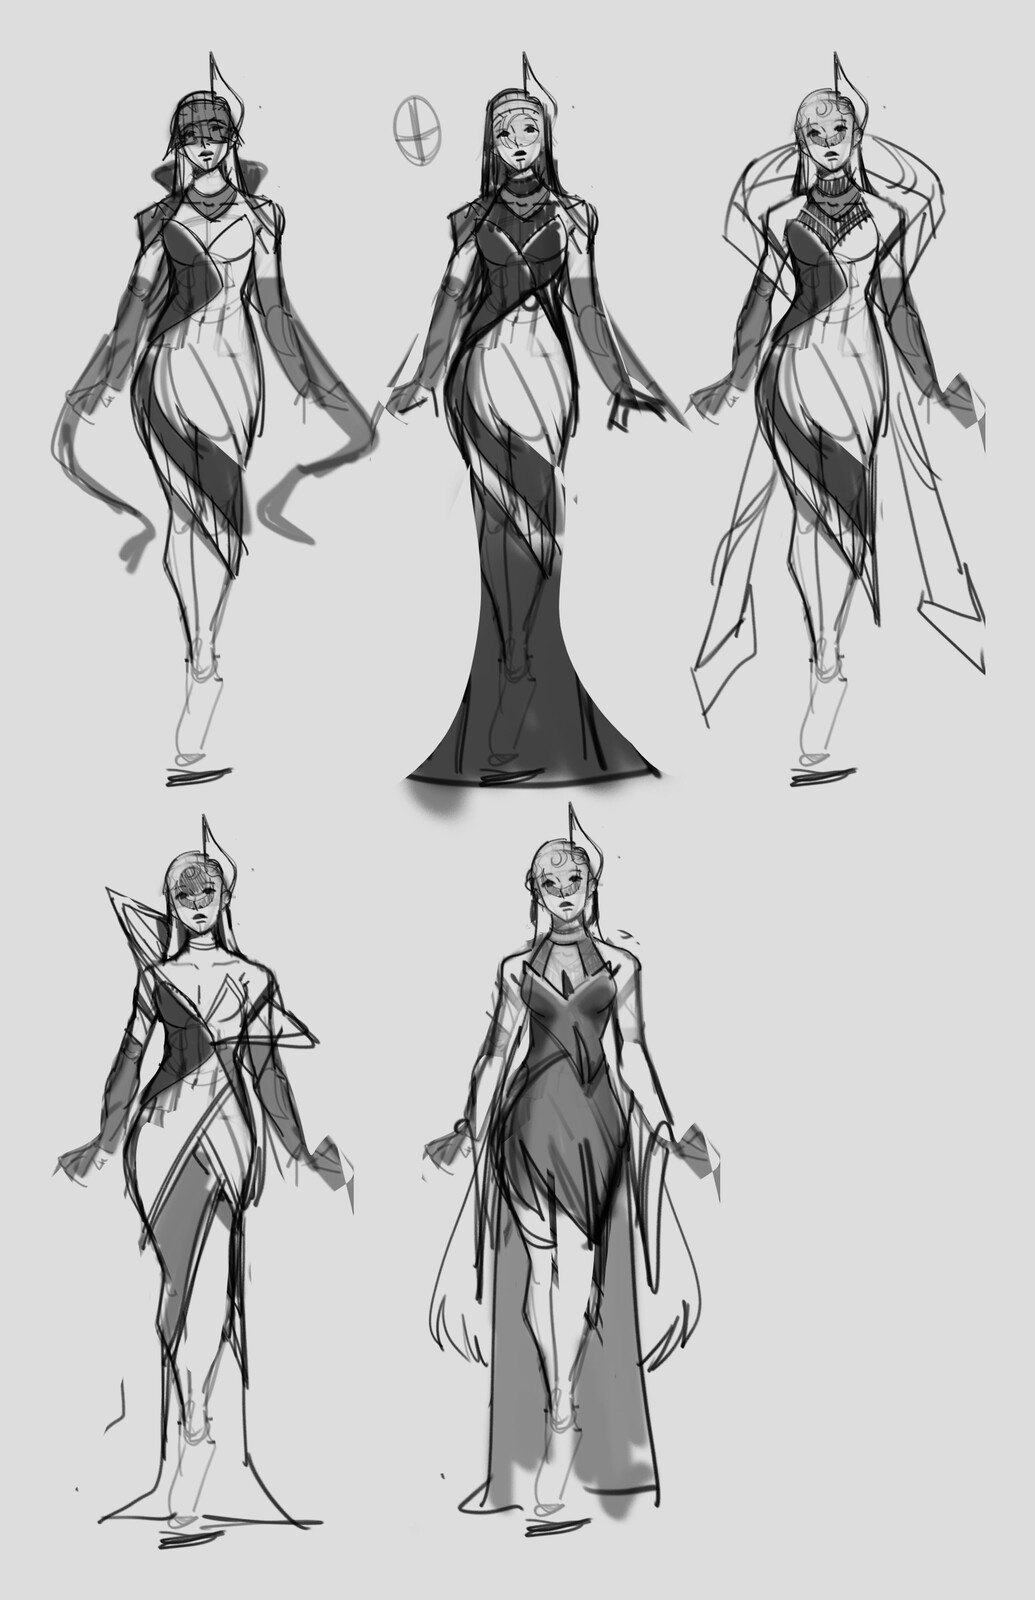 Some of the sketches for alune. I tried some experimental sketches with the idea of a priestess but ended up going safe with the coven shape language